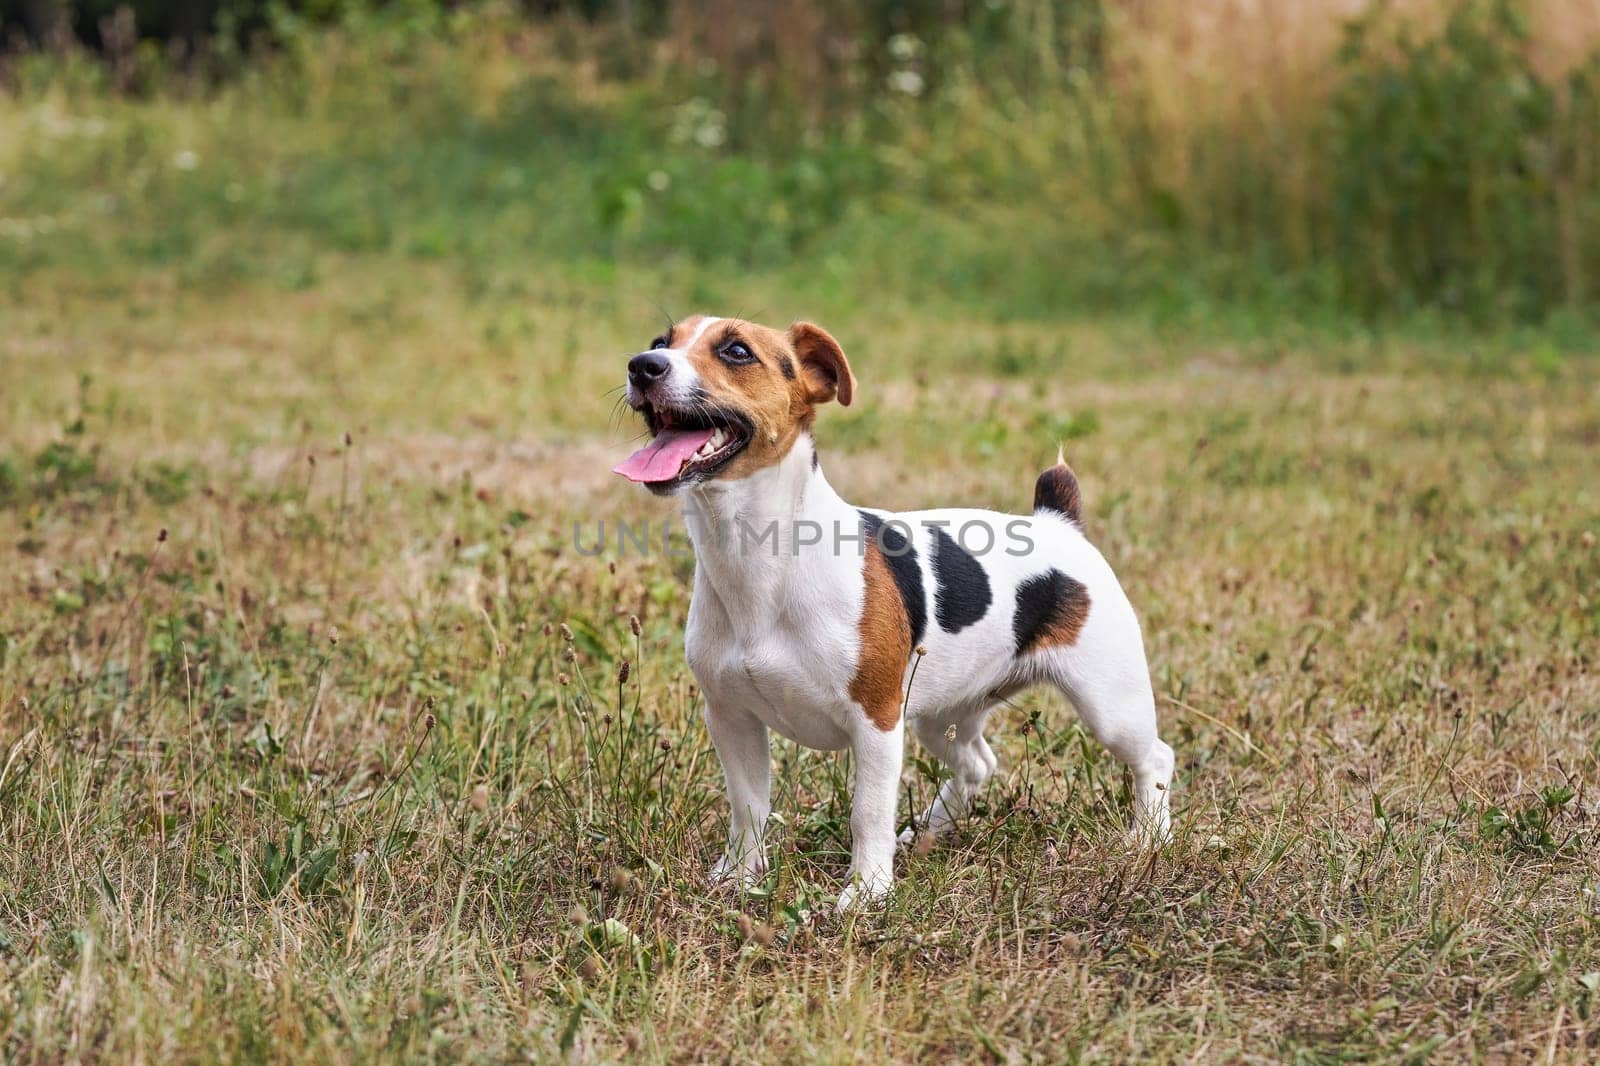 Small Jack Russell dog standing on meadow, her tongue out, looking up, waiting for toy to be thrown for her